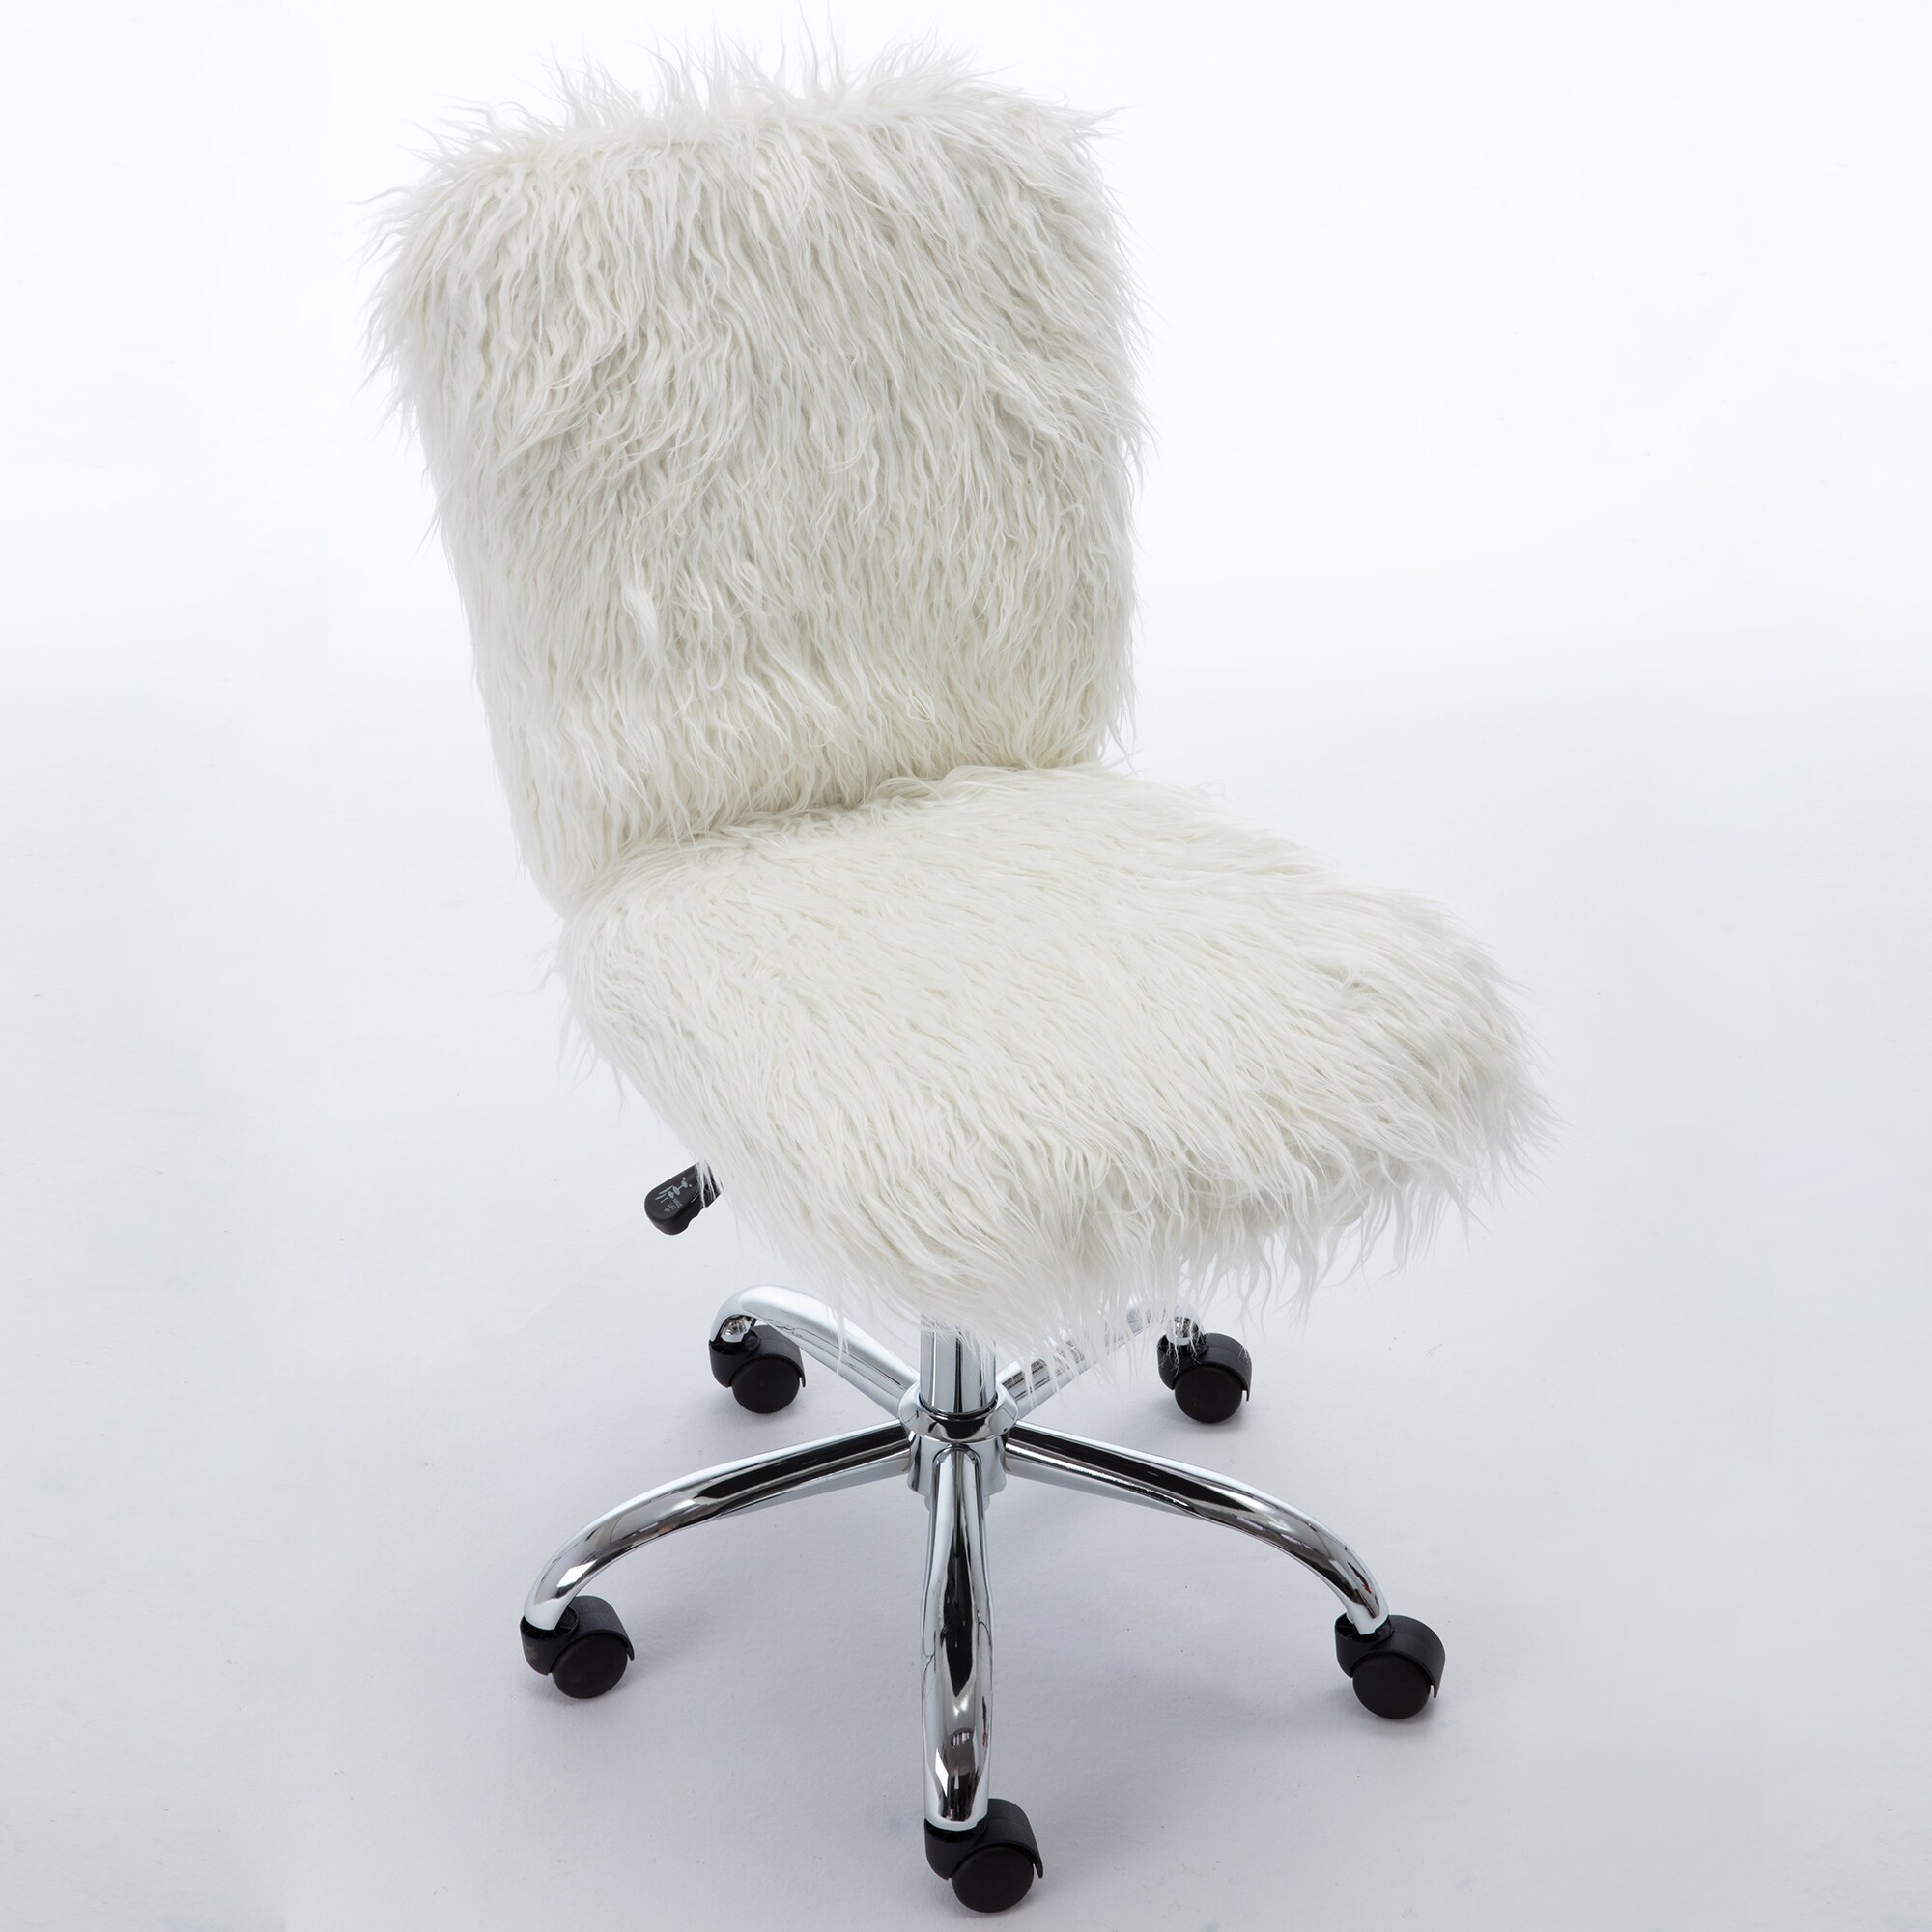 TiramisuBest Faux Fur Armless Office Chair, Makeup Vanity Fluffy Chair for Girls, White